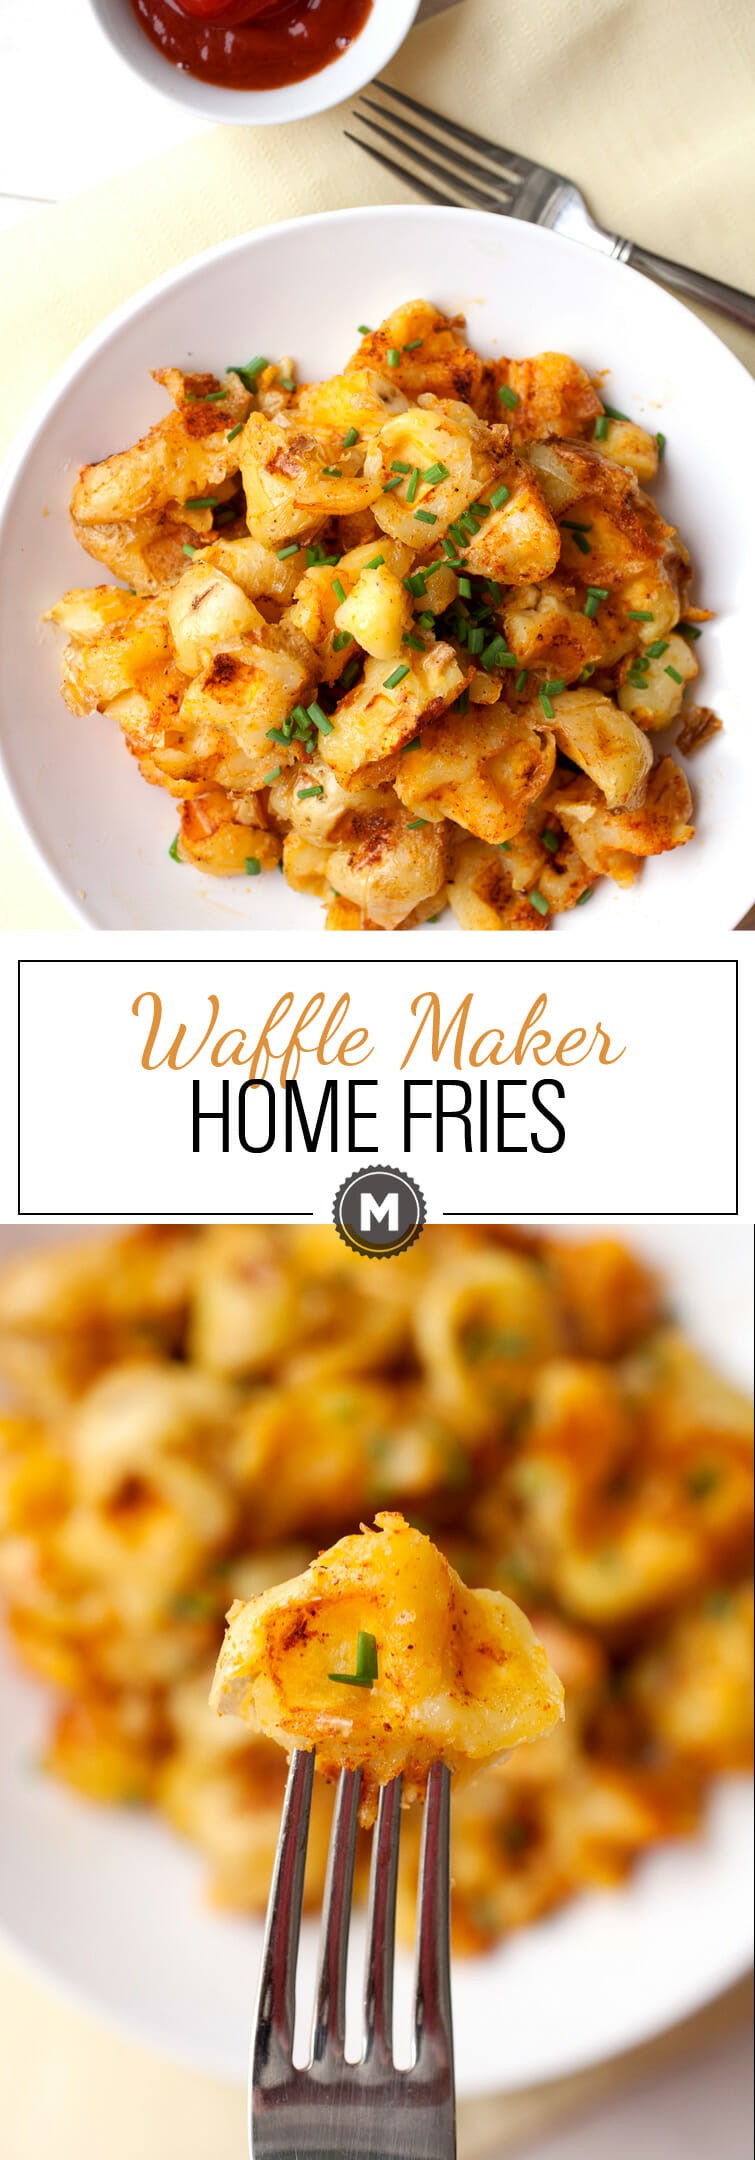 Waffle Maker Home Fries: Crispy and perfect home fries made in a waffle maker! Well seasoned with crispy edges and tender interior. Pile them high and enjoy! | macheesmo.com